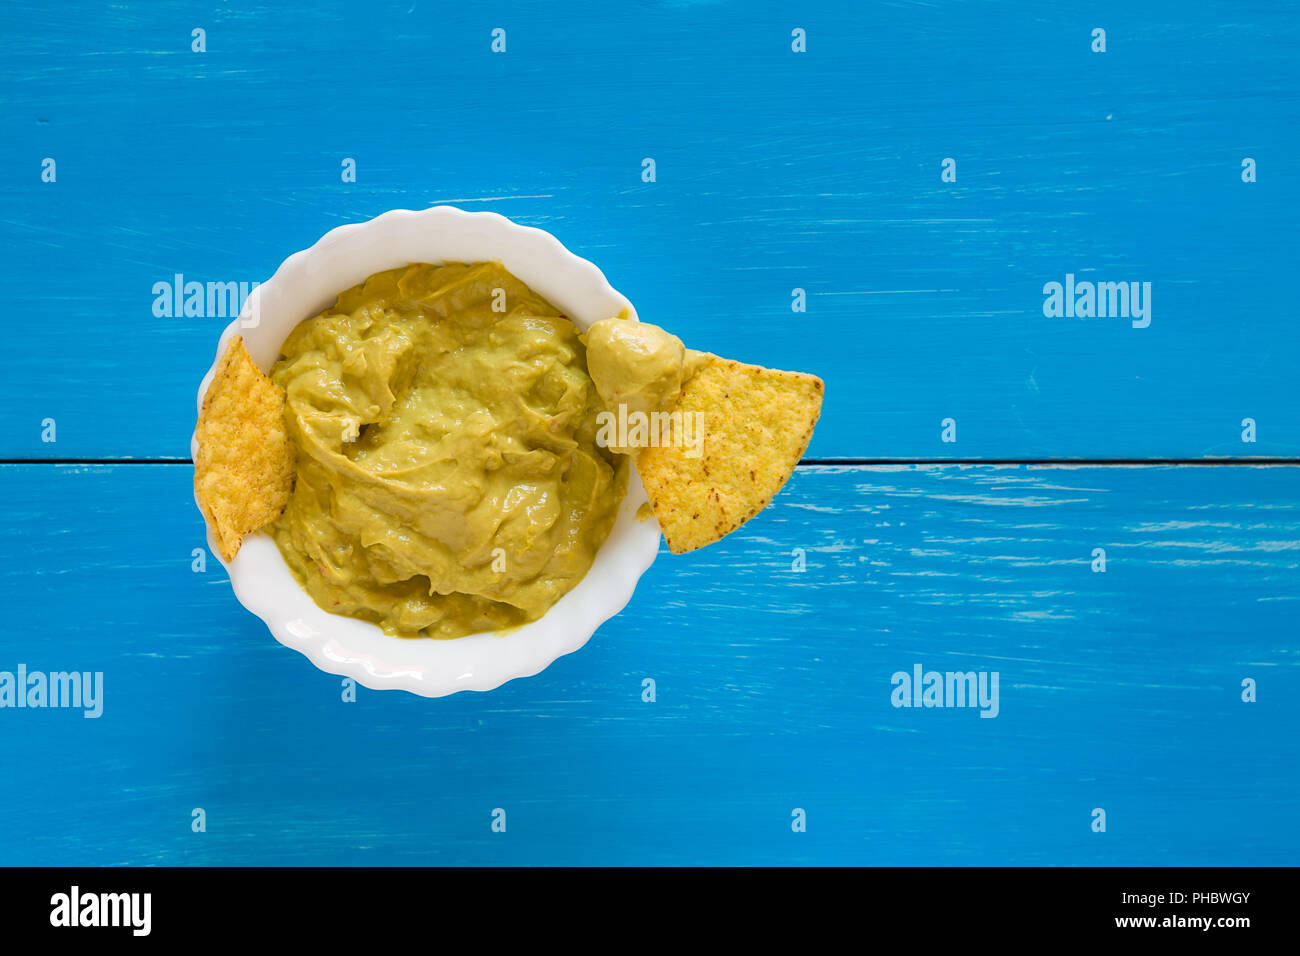 Nachos chips dipping in salsa guacamole over a blue background Stock Photo